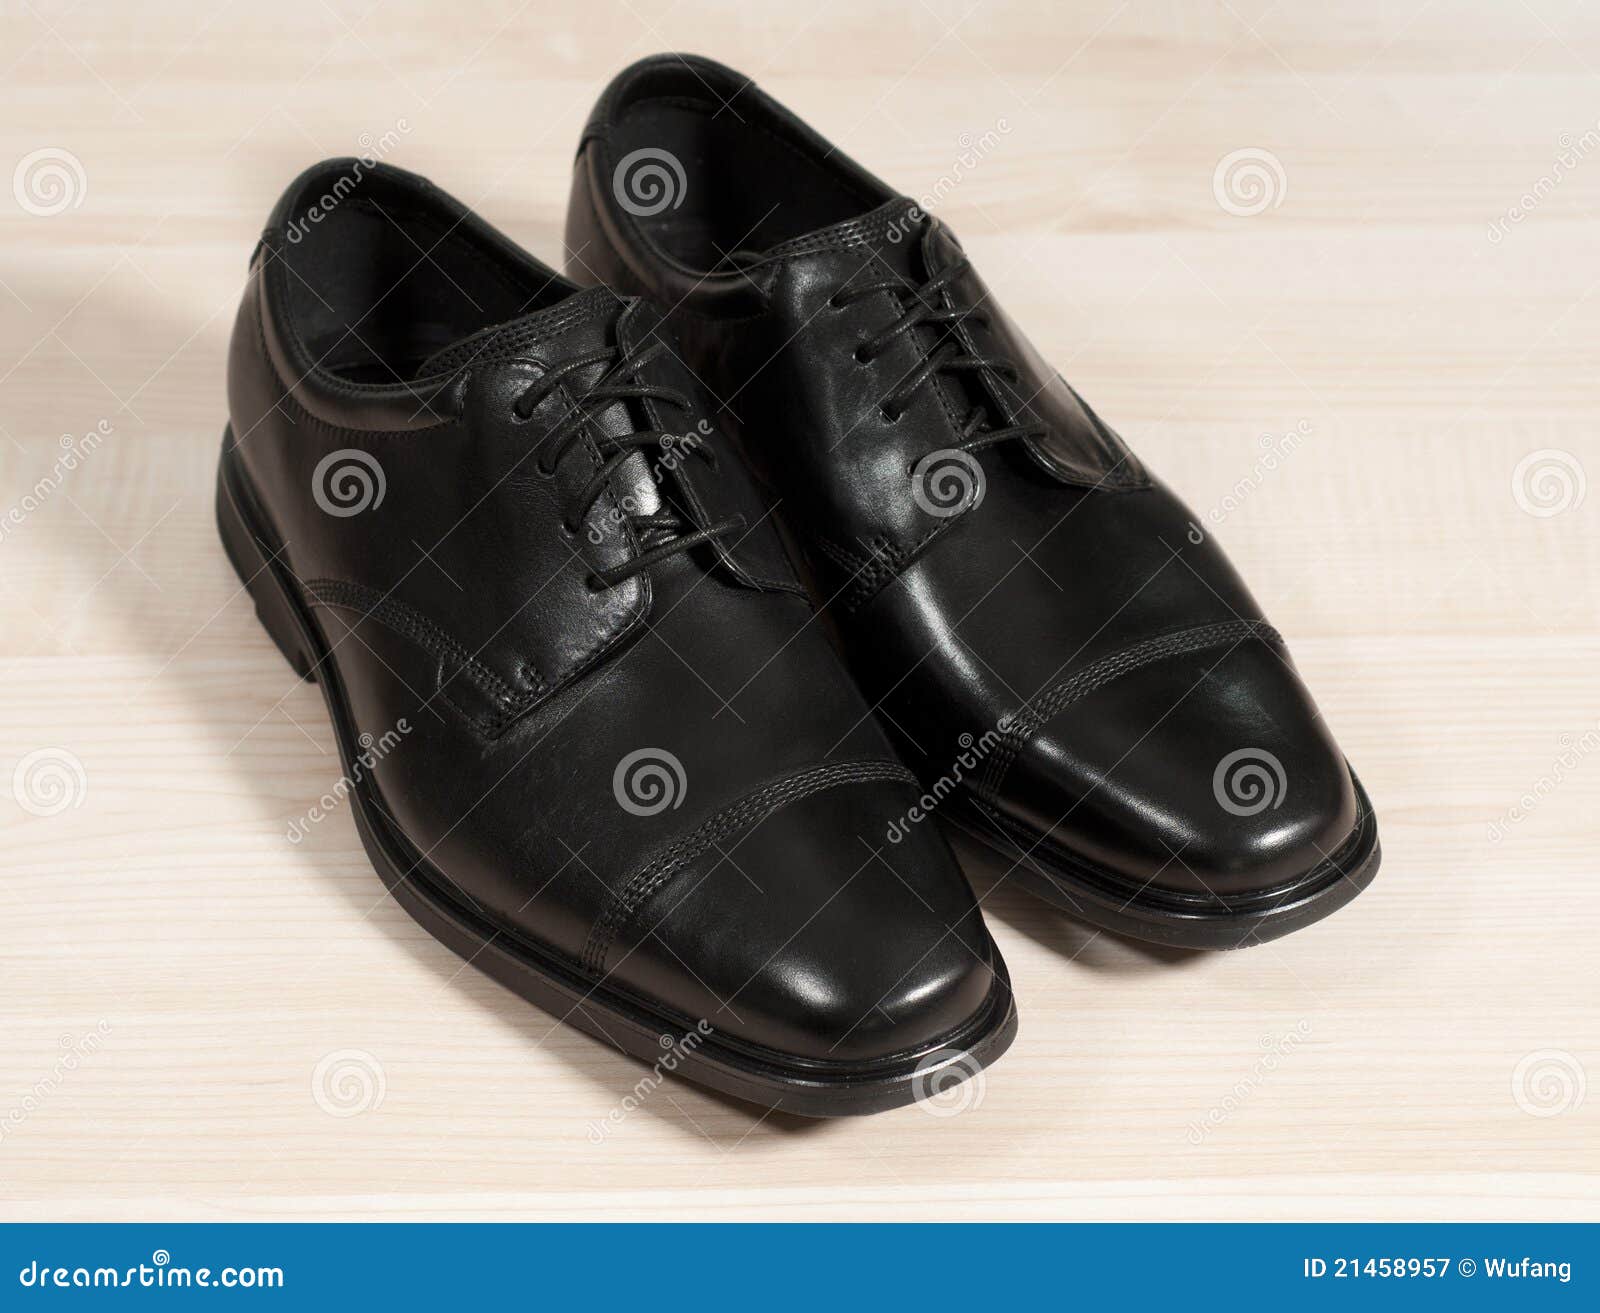 Black Leather Shoes stock image. Image of cloth, traditional - 21458957